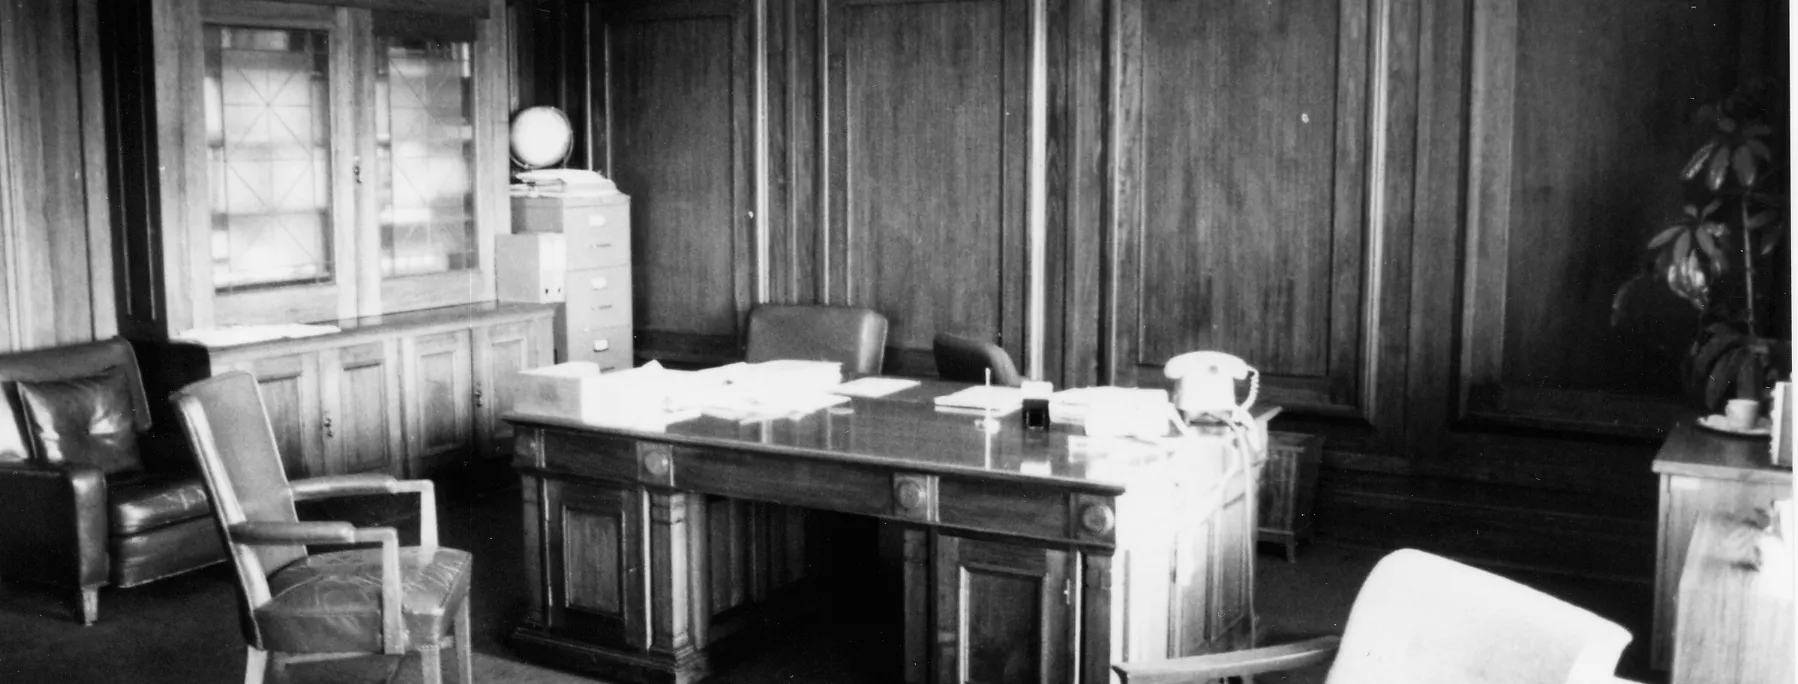 This black and white photograph shows the layout of the Clerk of the Senate’s office in 1985 when it was occupied by Alan Cumming Thom. The timber-panelled room contains a large desk (originally designed by the building’s architect, John Smith Murdoch), glass-fronted built-in bookshelves and a sideboard with an indoor plant. There are a range of visitor chairs and an easy chair in the foreground.